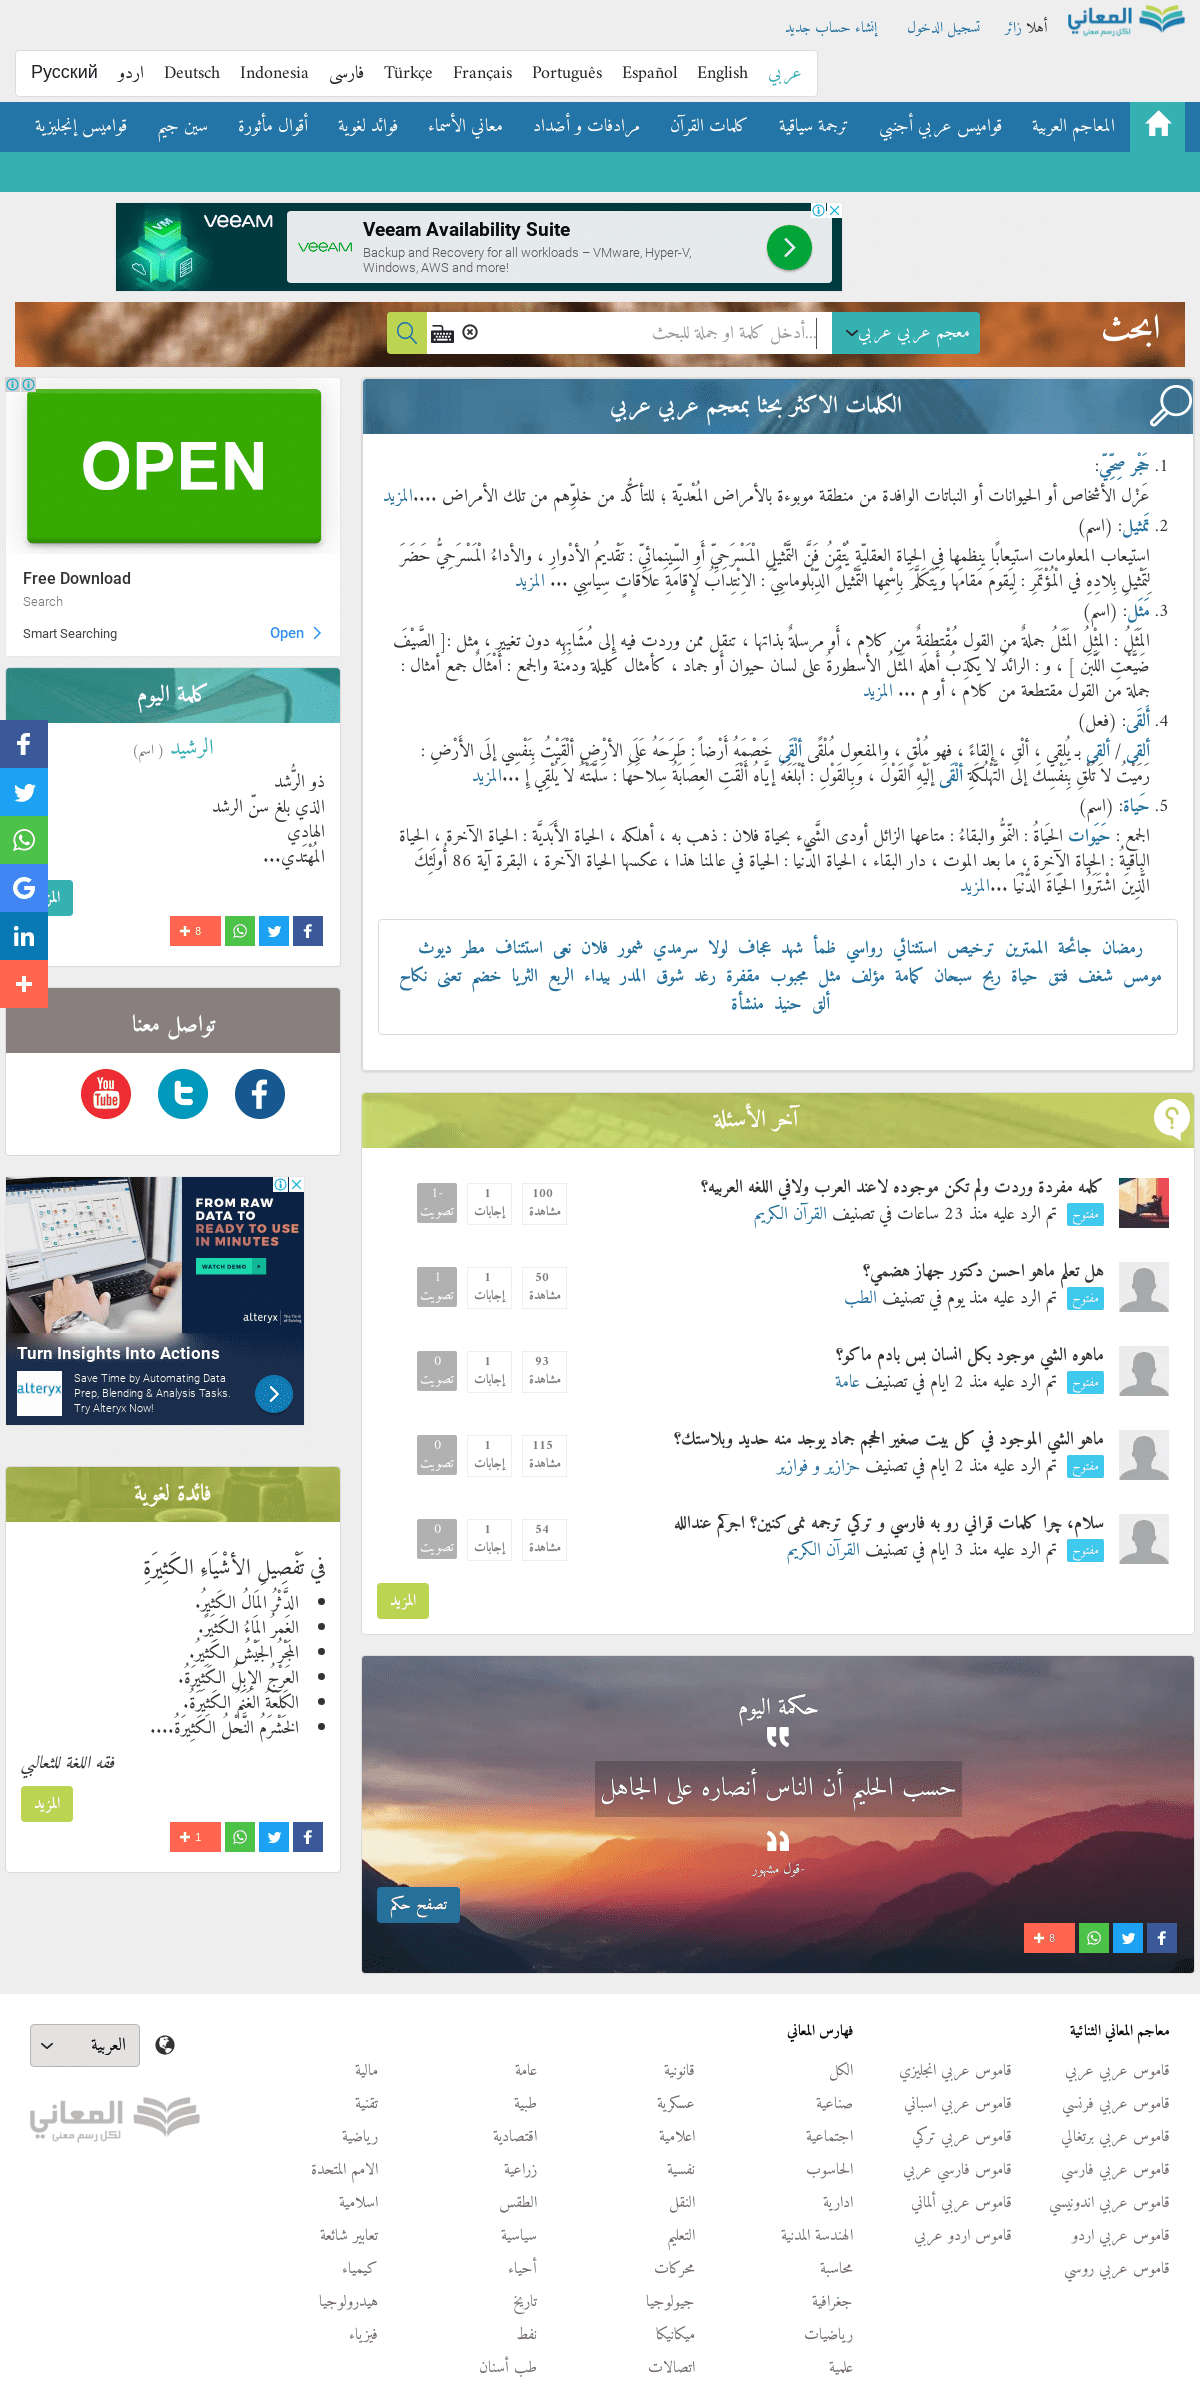 A complete backup of almaany.com